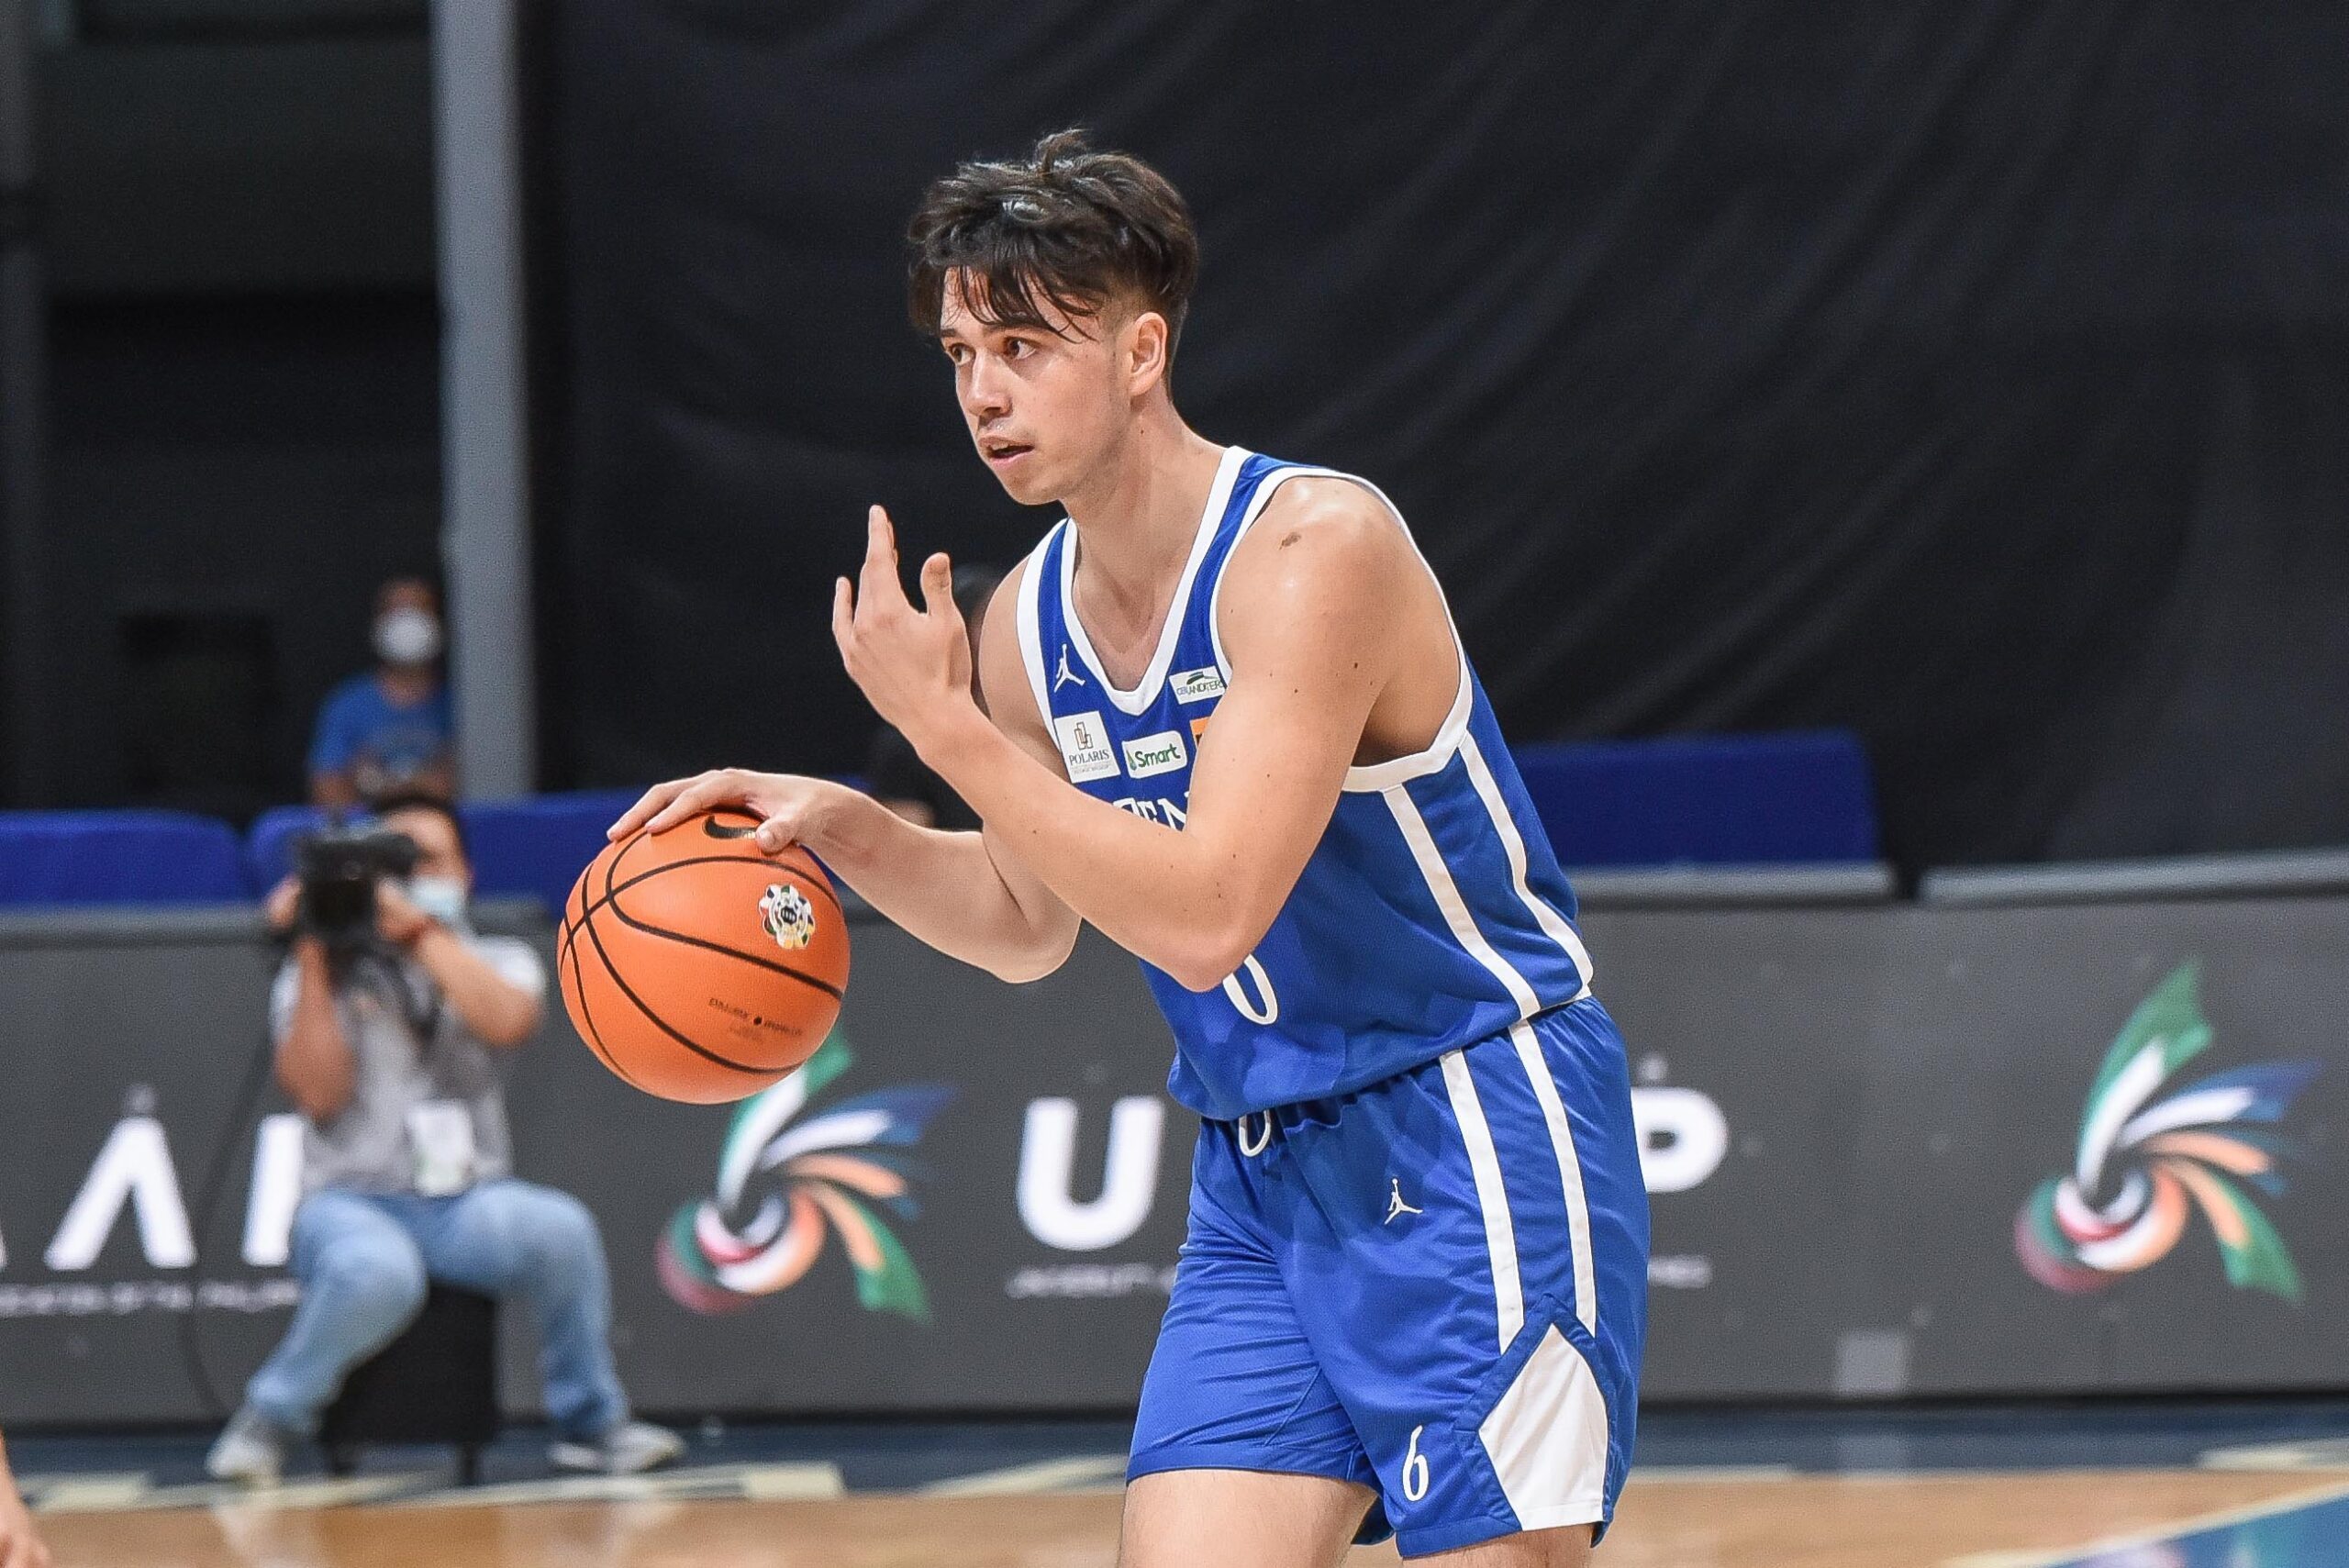 New-look Ateneo pummels Indonesia by 86 in Japan pocket tournament debut